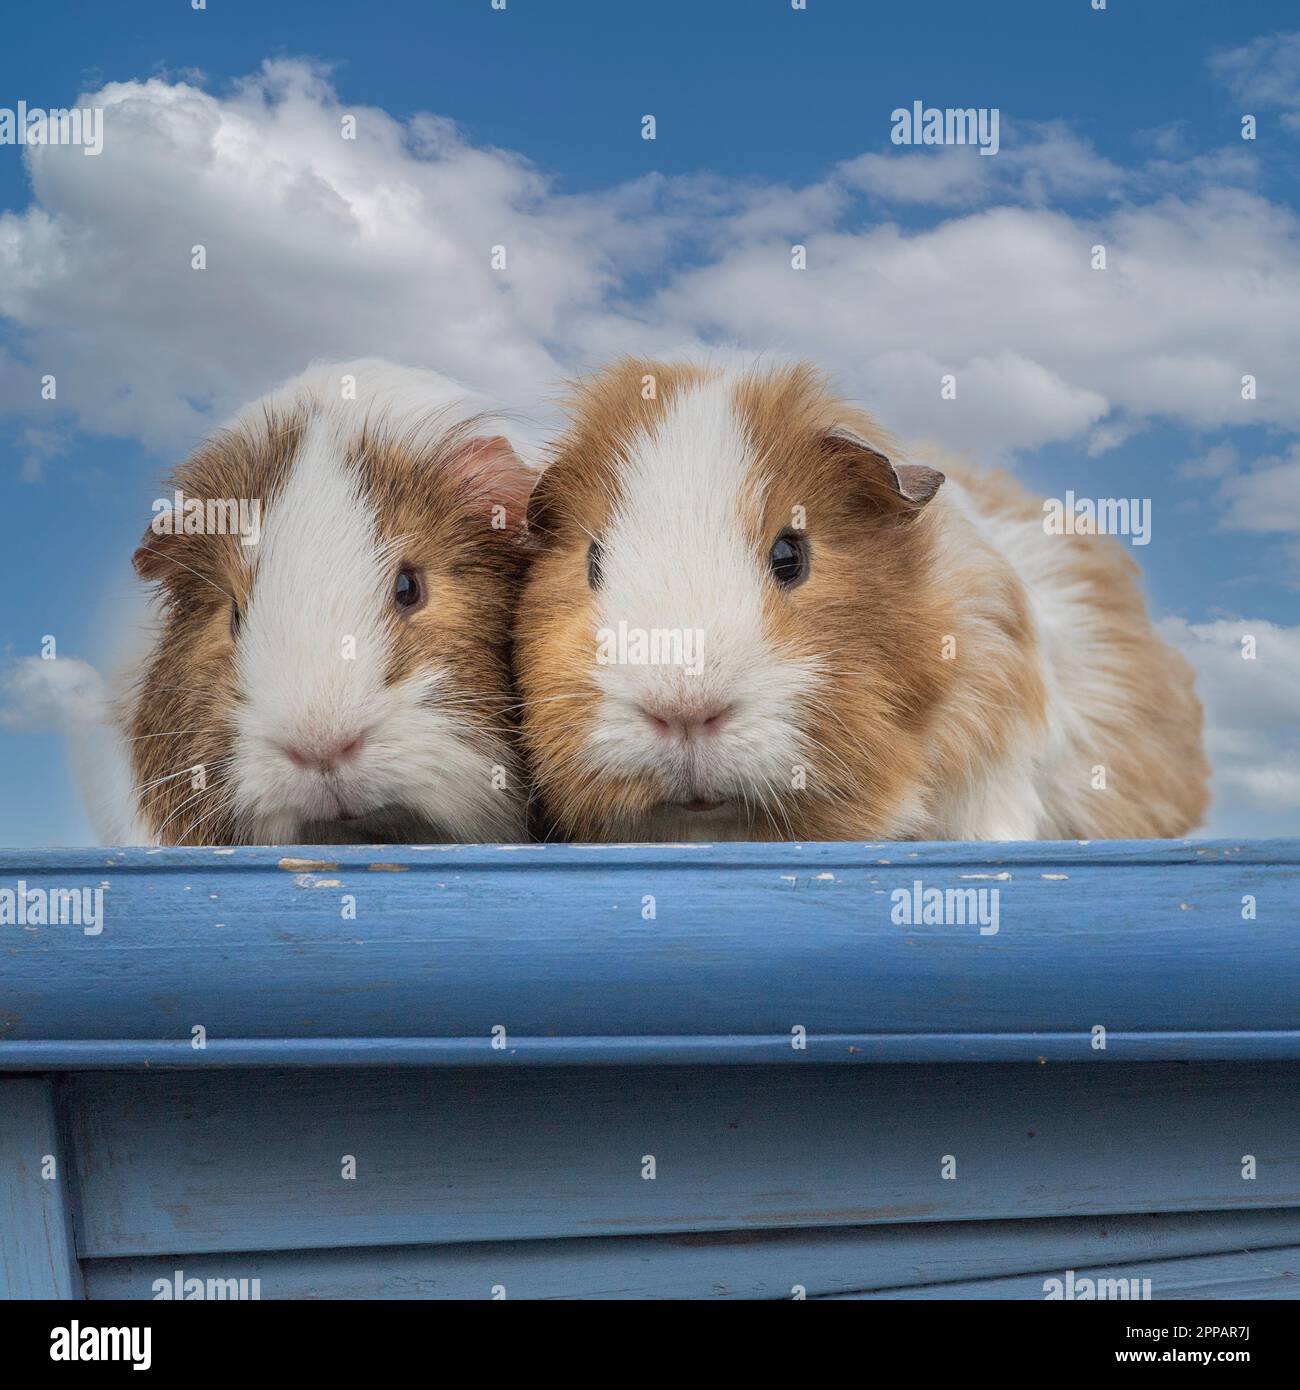 two Guinea Pigs Stock Photo